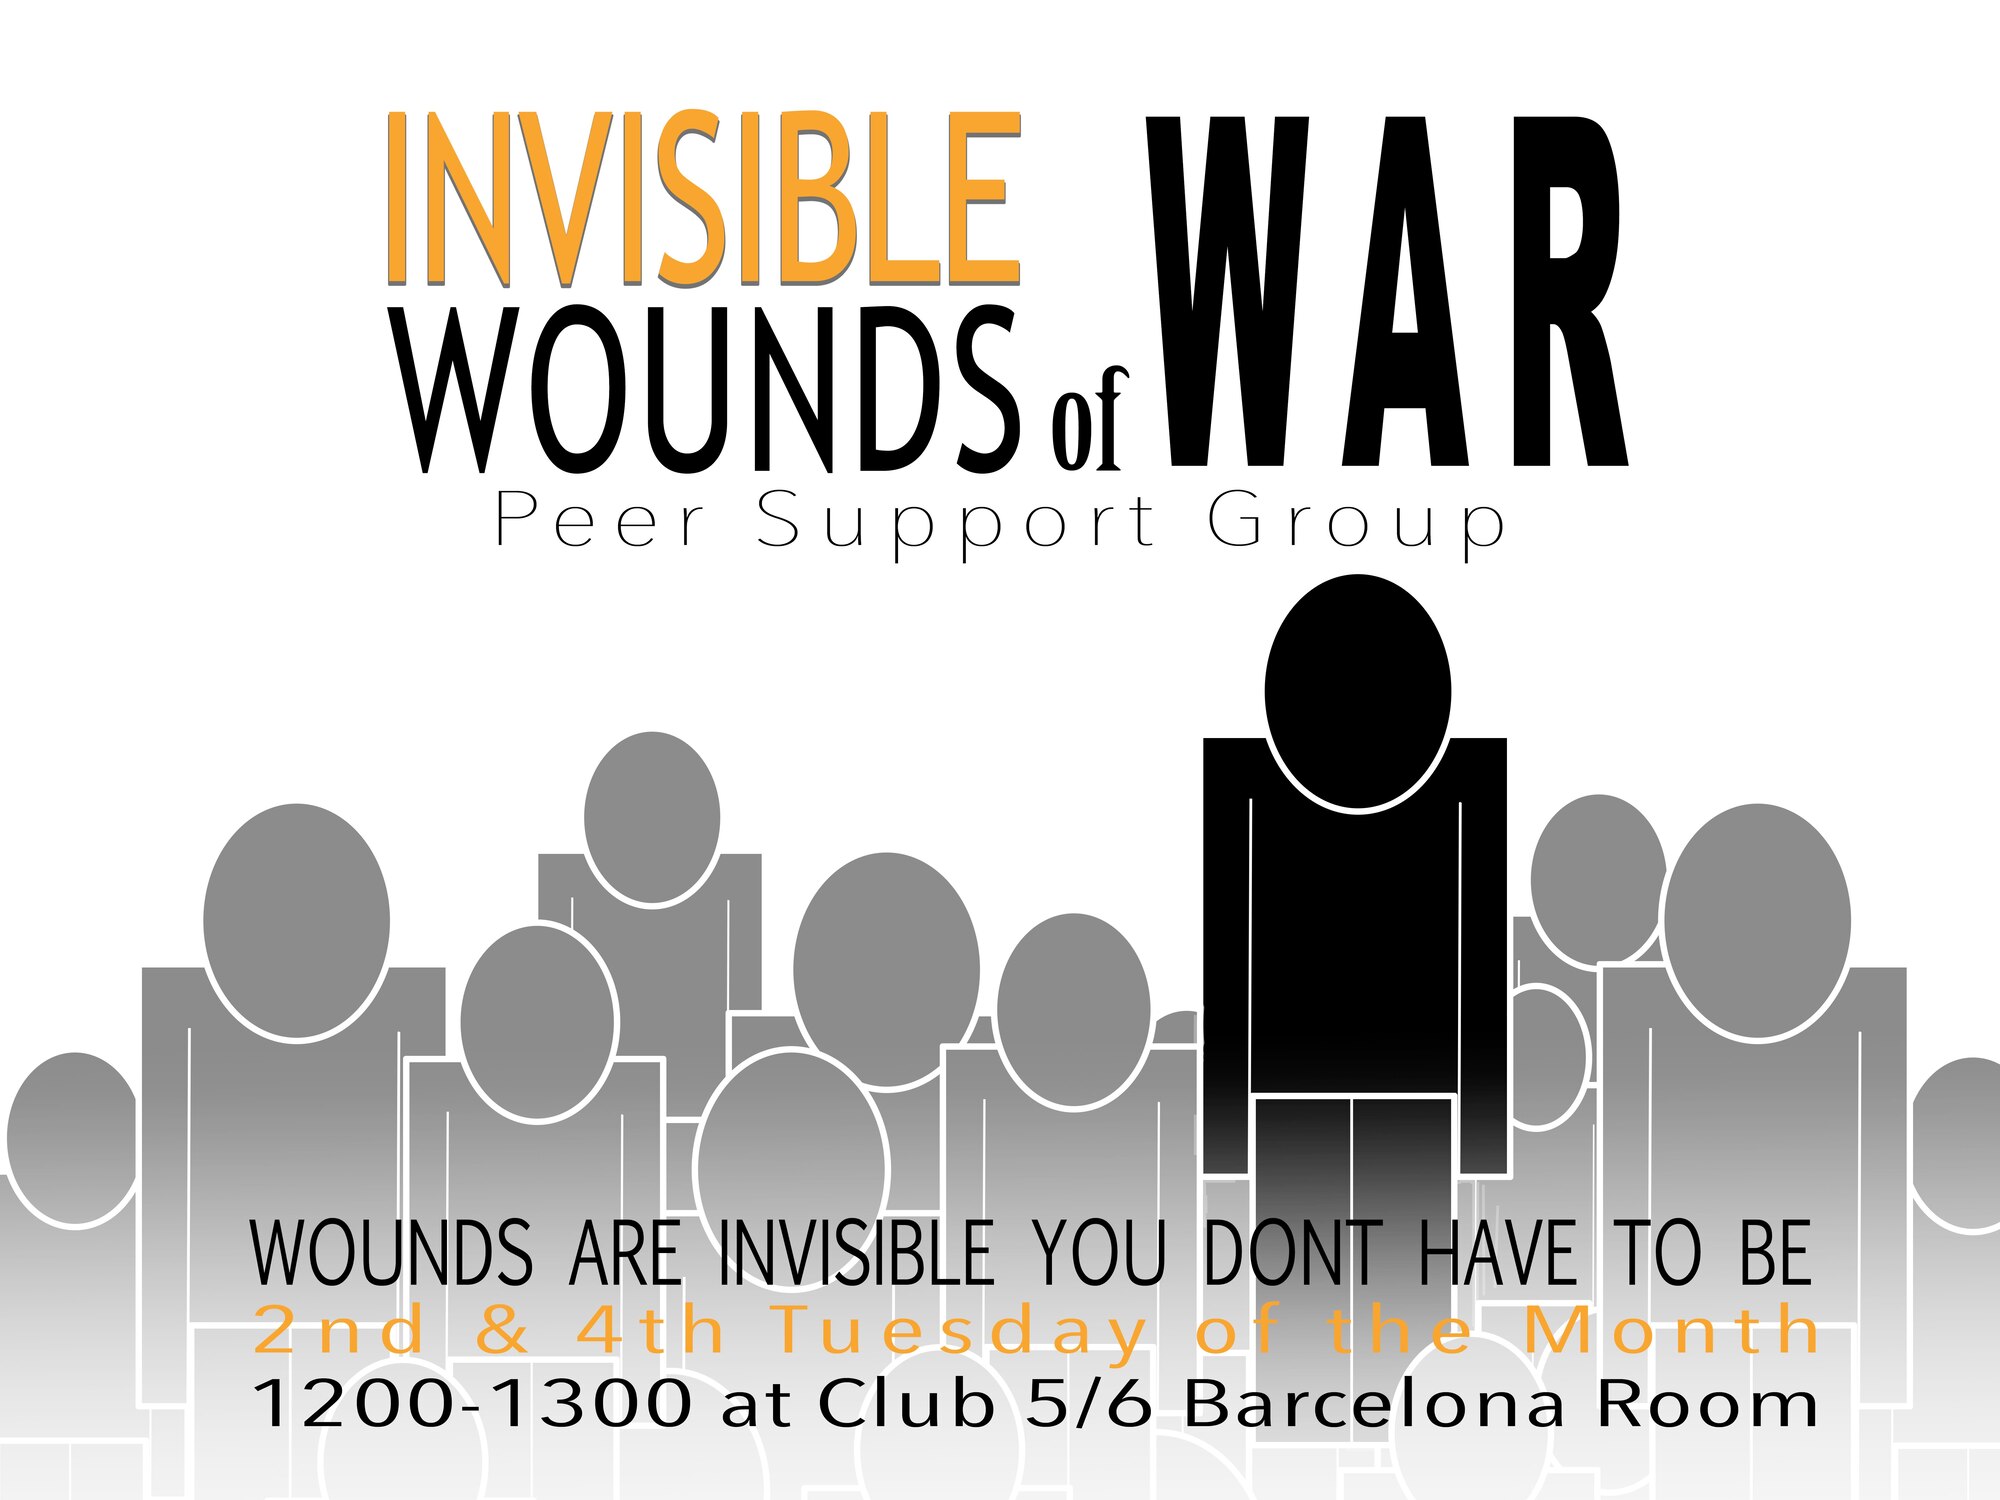 The Invisible Wounds or War peer support group at Luke Air Force Base, Ariz., is a place for Team Luke to come together to discuss PTSD related issues. The group is scheduled to meet the second and fourth Tuesday of each month at the Club Five Six Barcelona room beginning Aug 22nd. (U.S. Air Force graphic/Staff Sgt. Jensen Stidham)